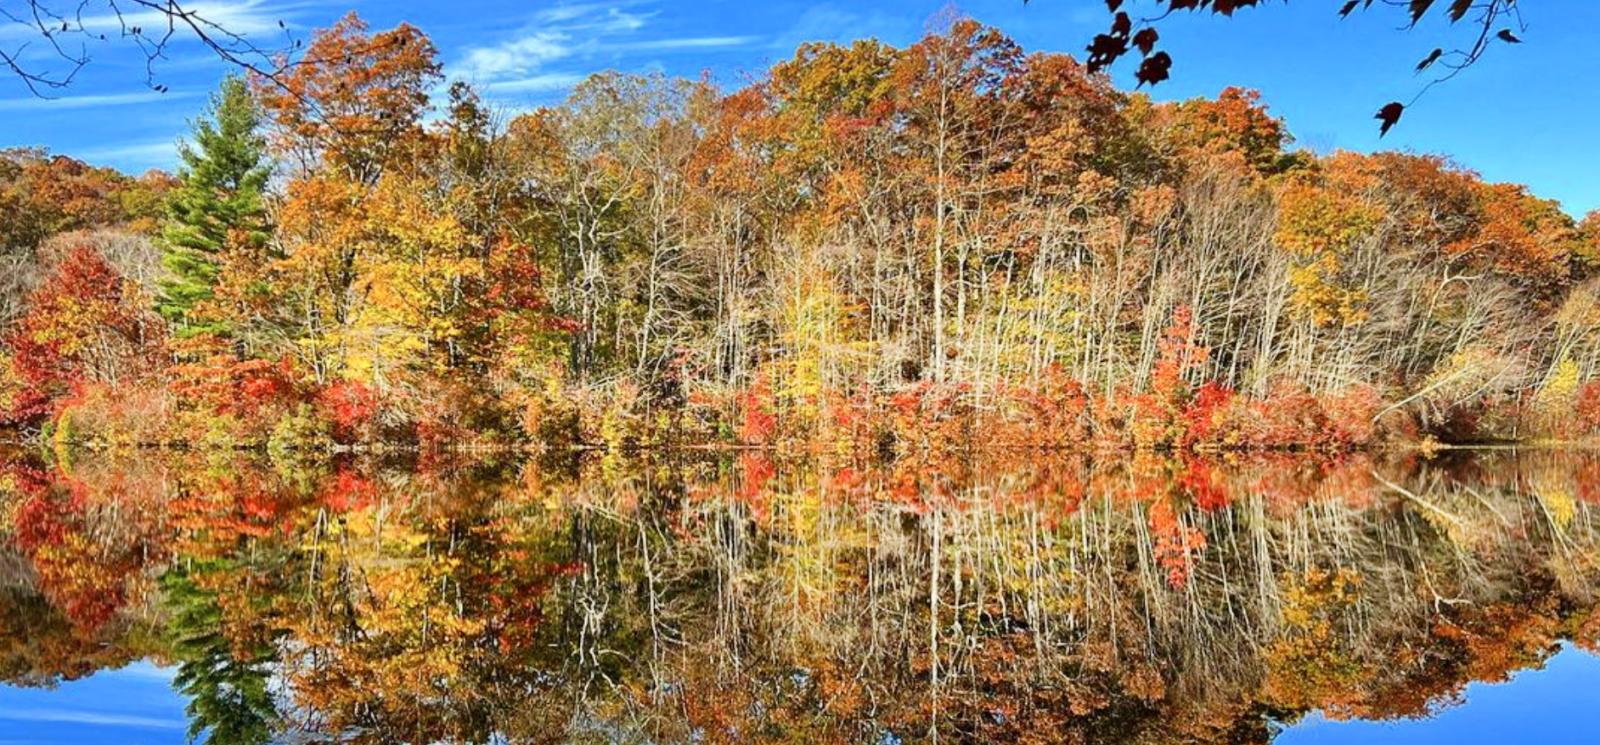 Pond reflecting fall trees and blue sky (Instagram@jrstclair)